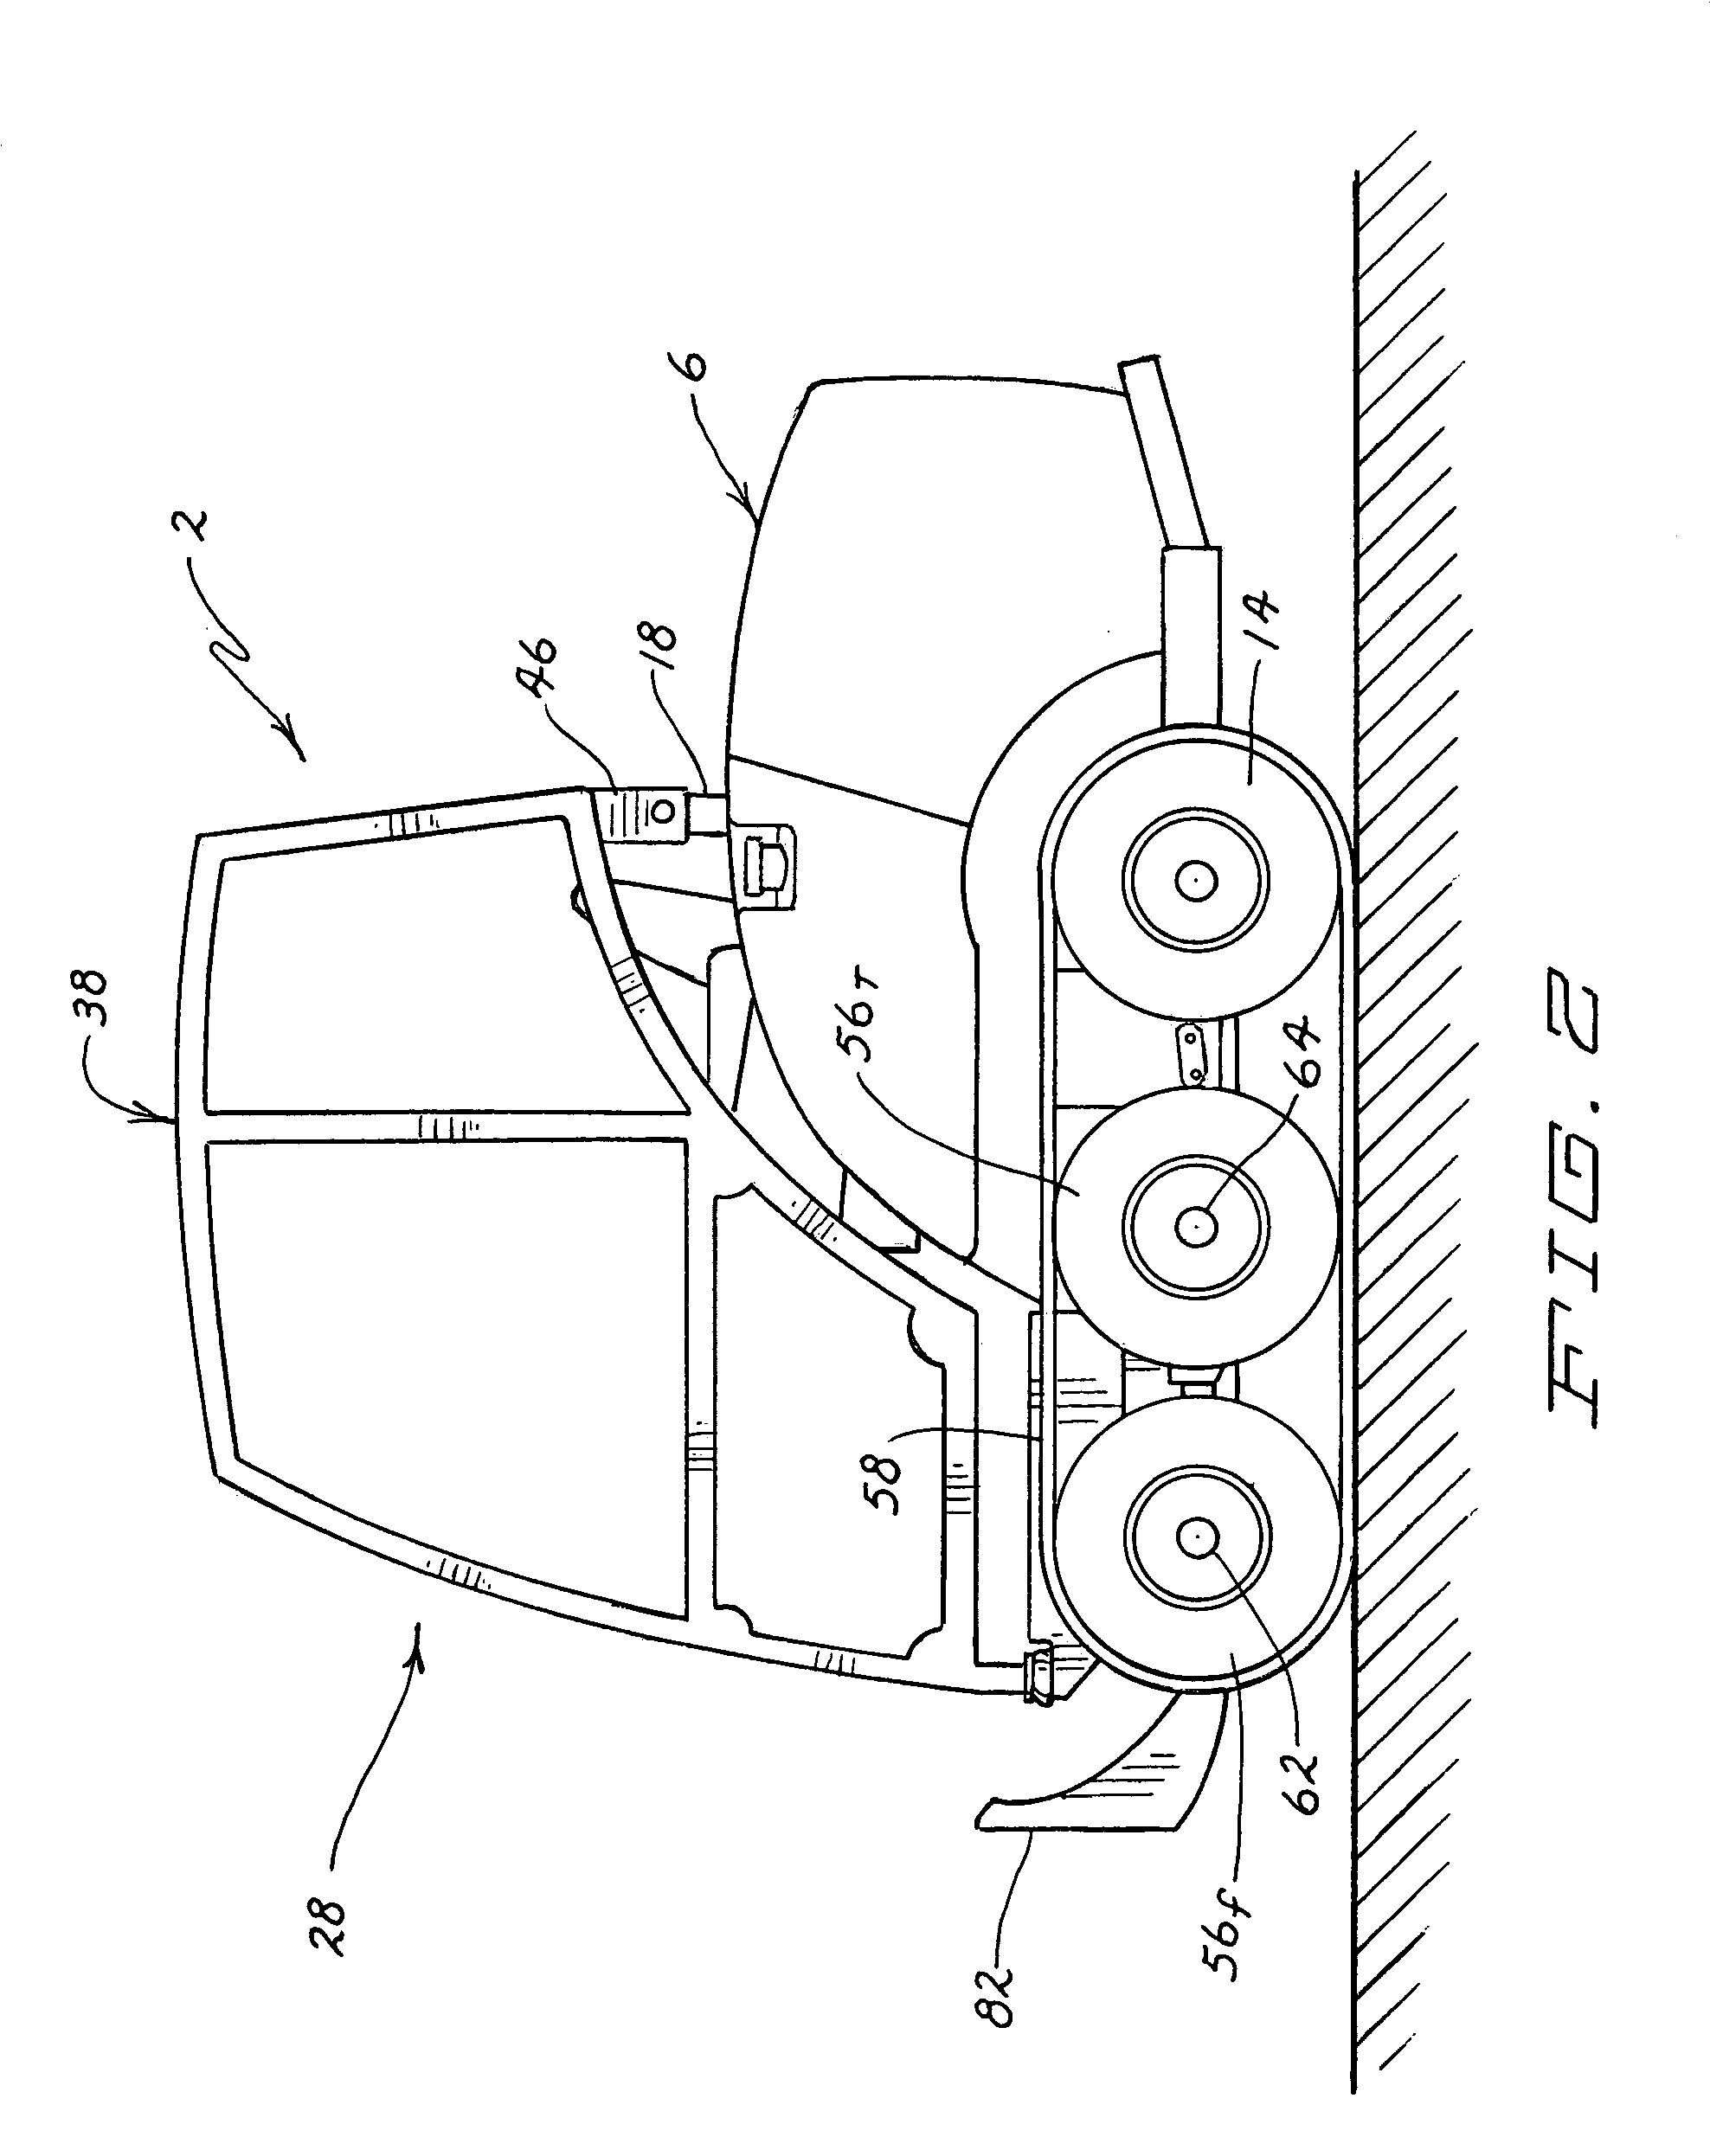 Mower with ground following cutting deck and weight transfer between deck and frame